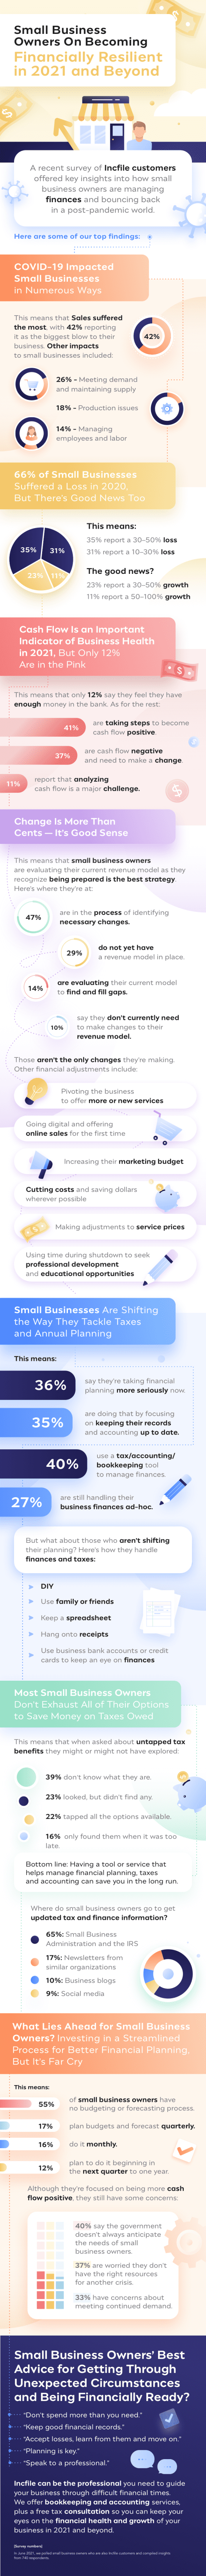 small-business-owners-financially-resilient-Infographic